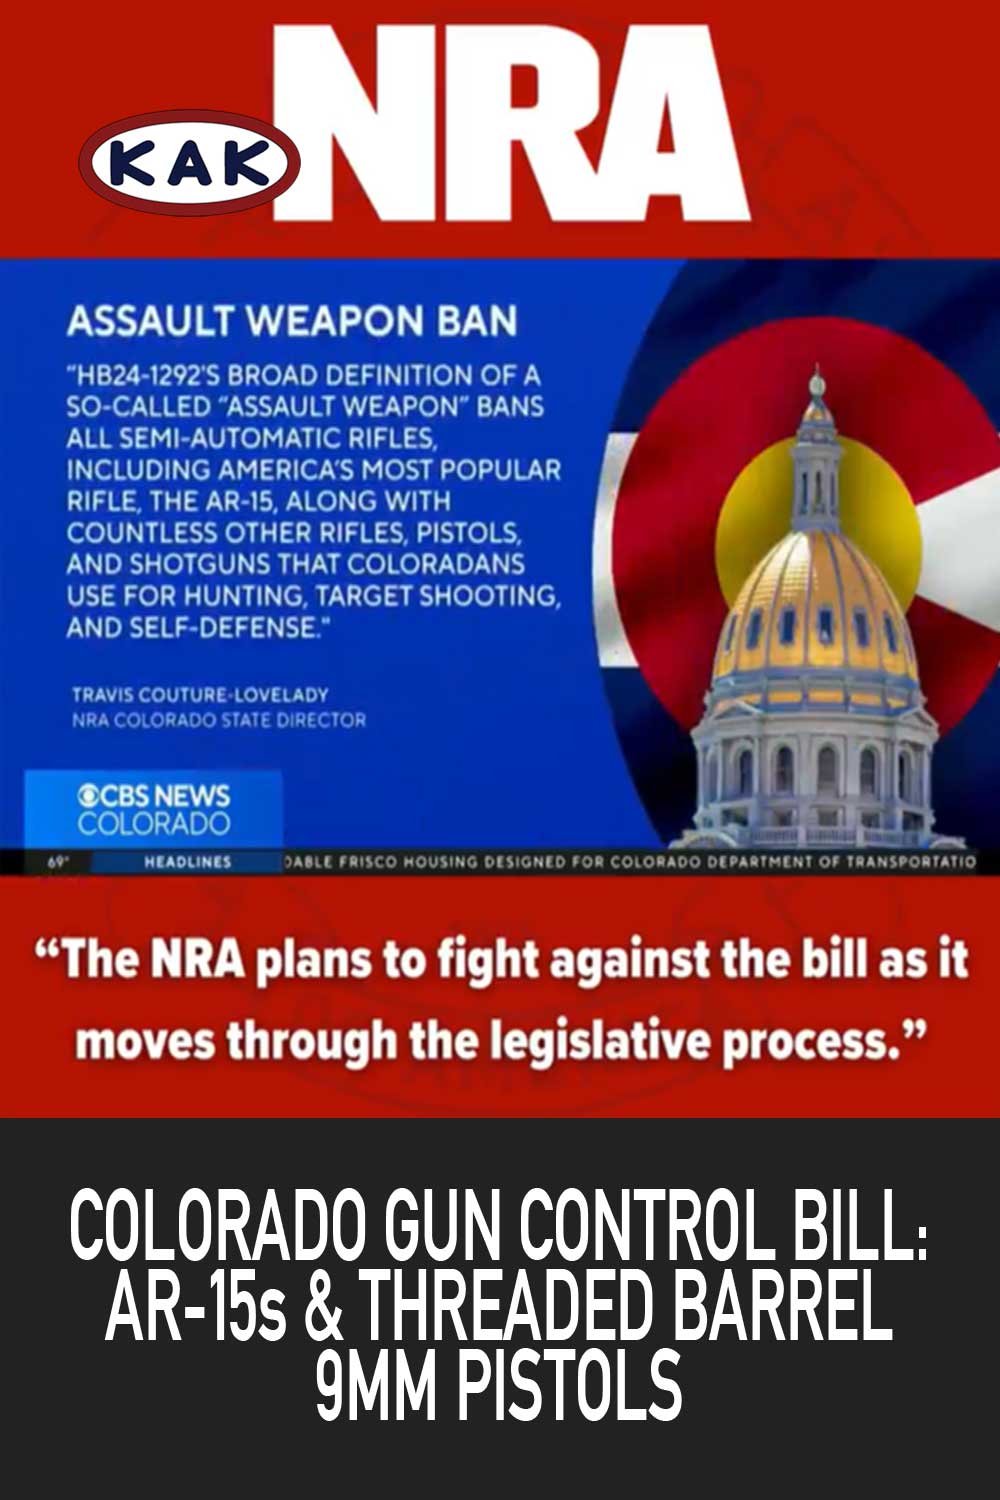 Colorado House Democrats Take Aim at Gun Control: Bill Passed to Ban AR-15s and Threaded-Barrel 9mm Pistols